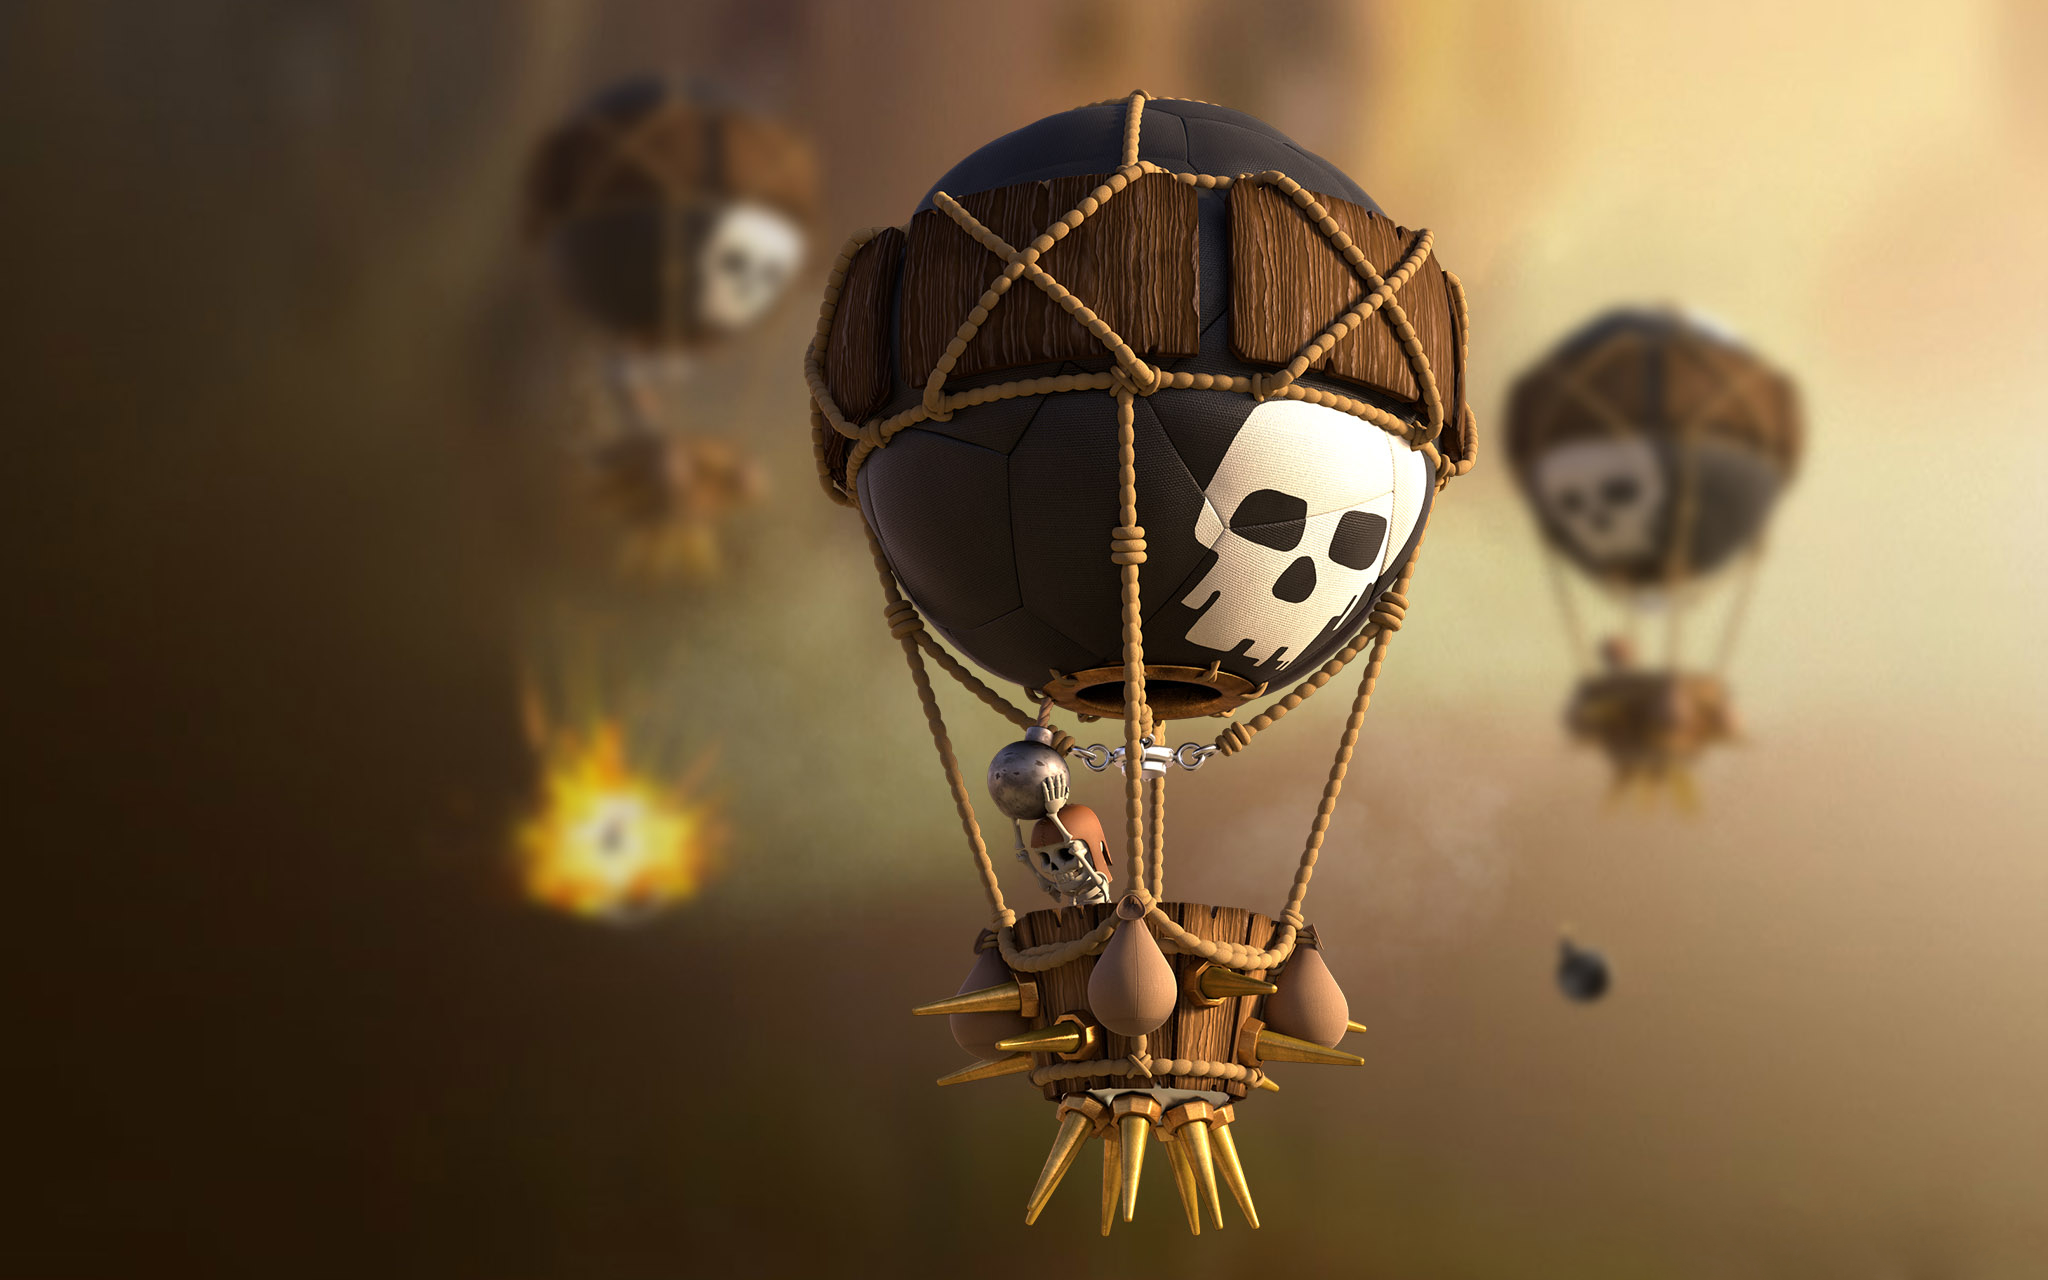 Download Original - Clash Of Clans Balloon , HD Wallpaper & Backgrounds